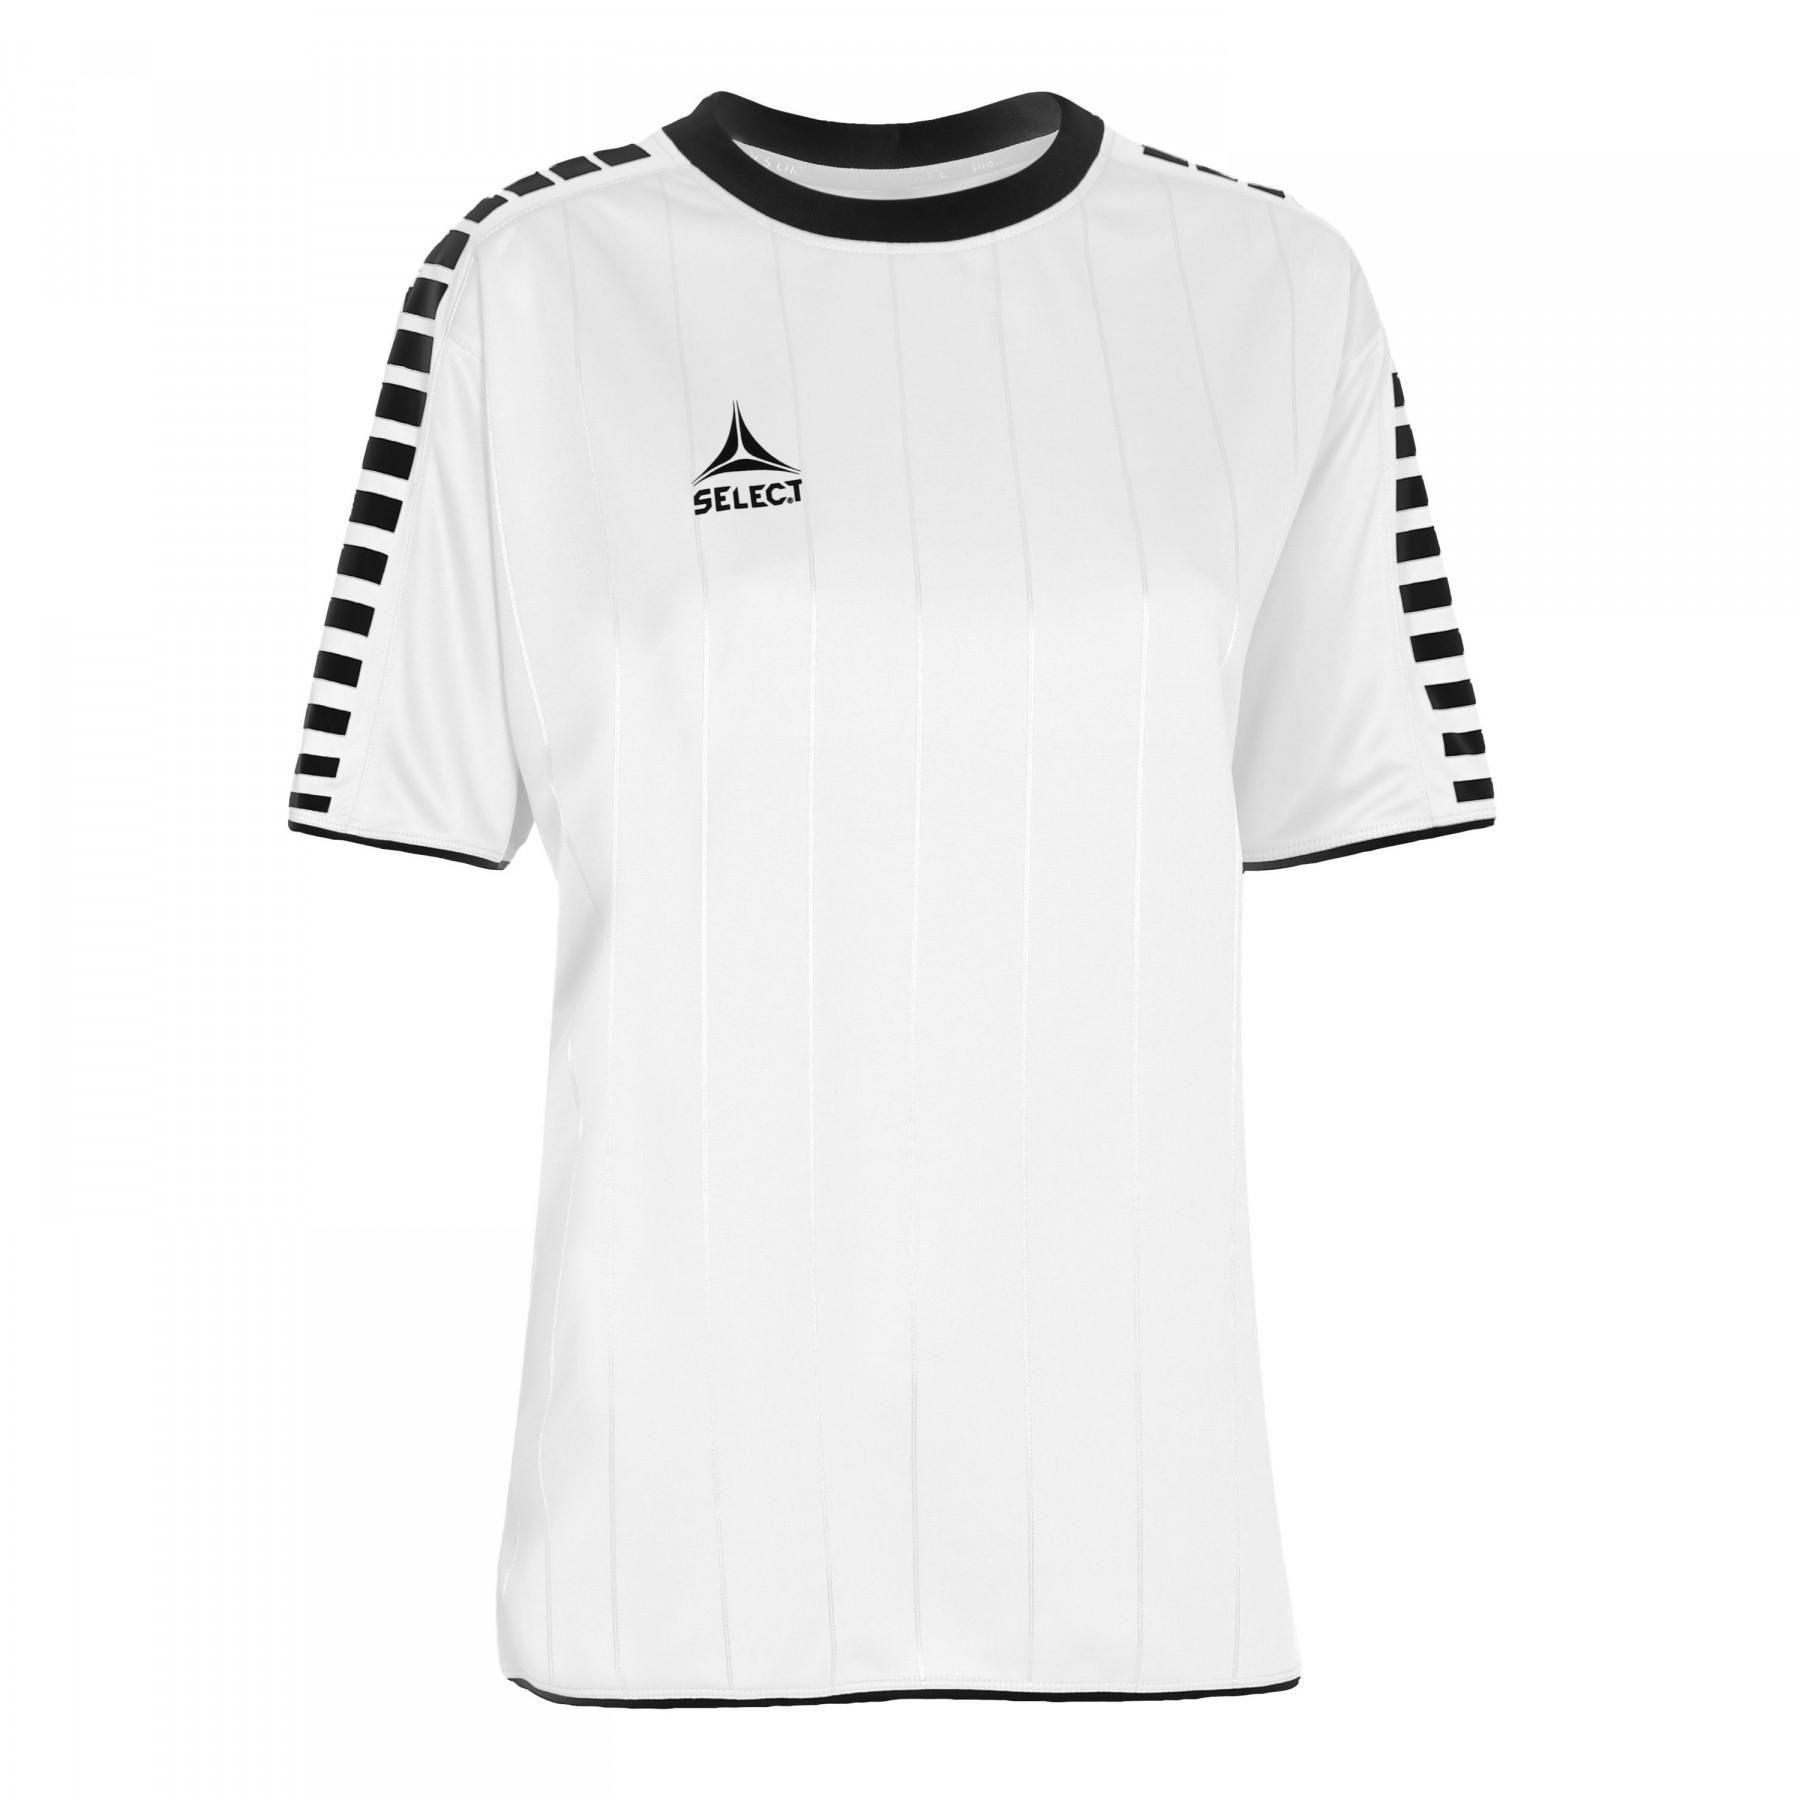 Women's jersey Select Argentina